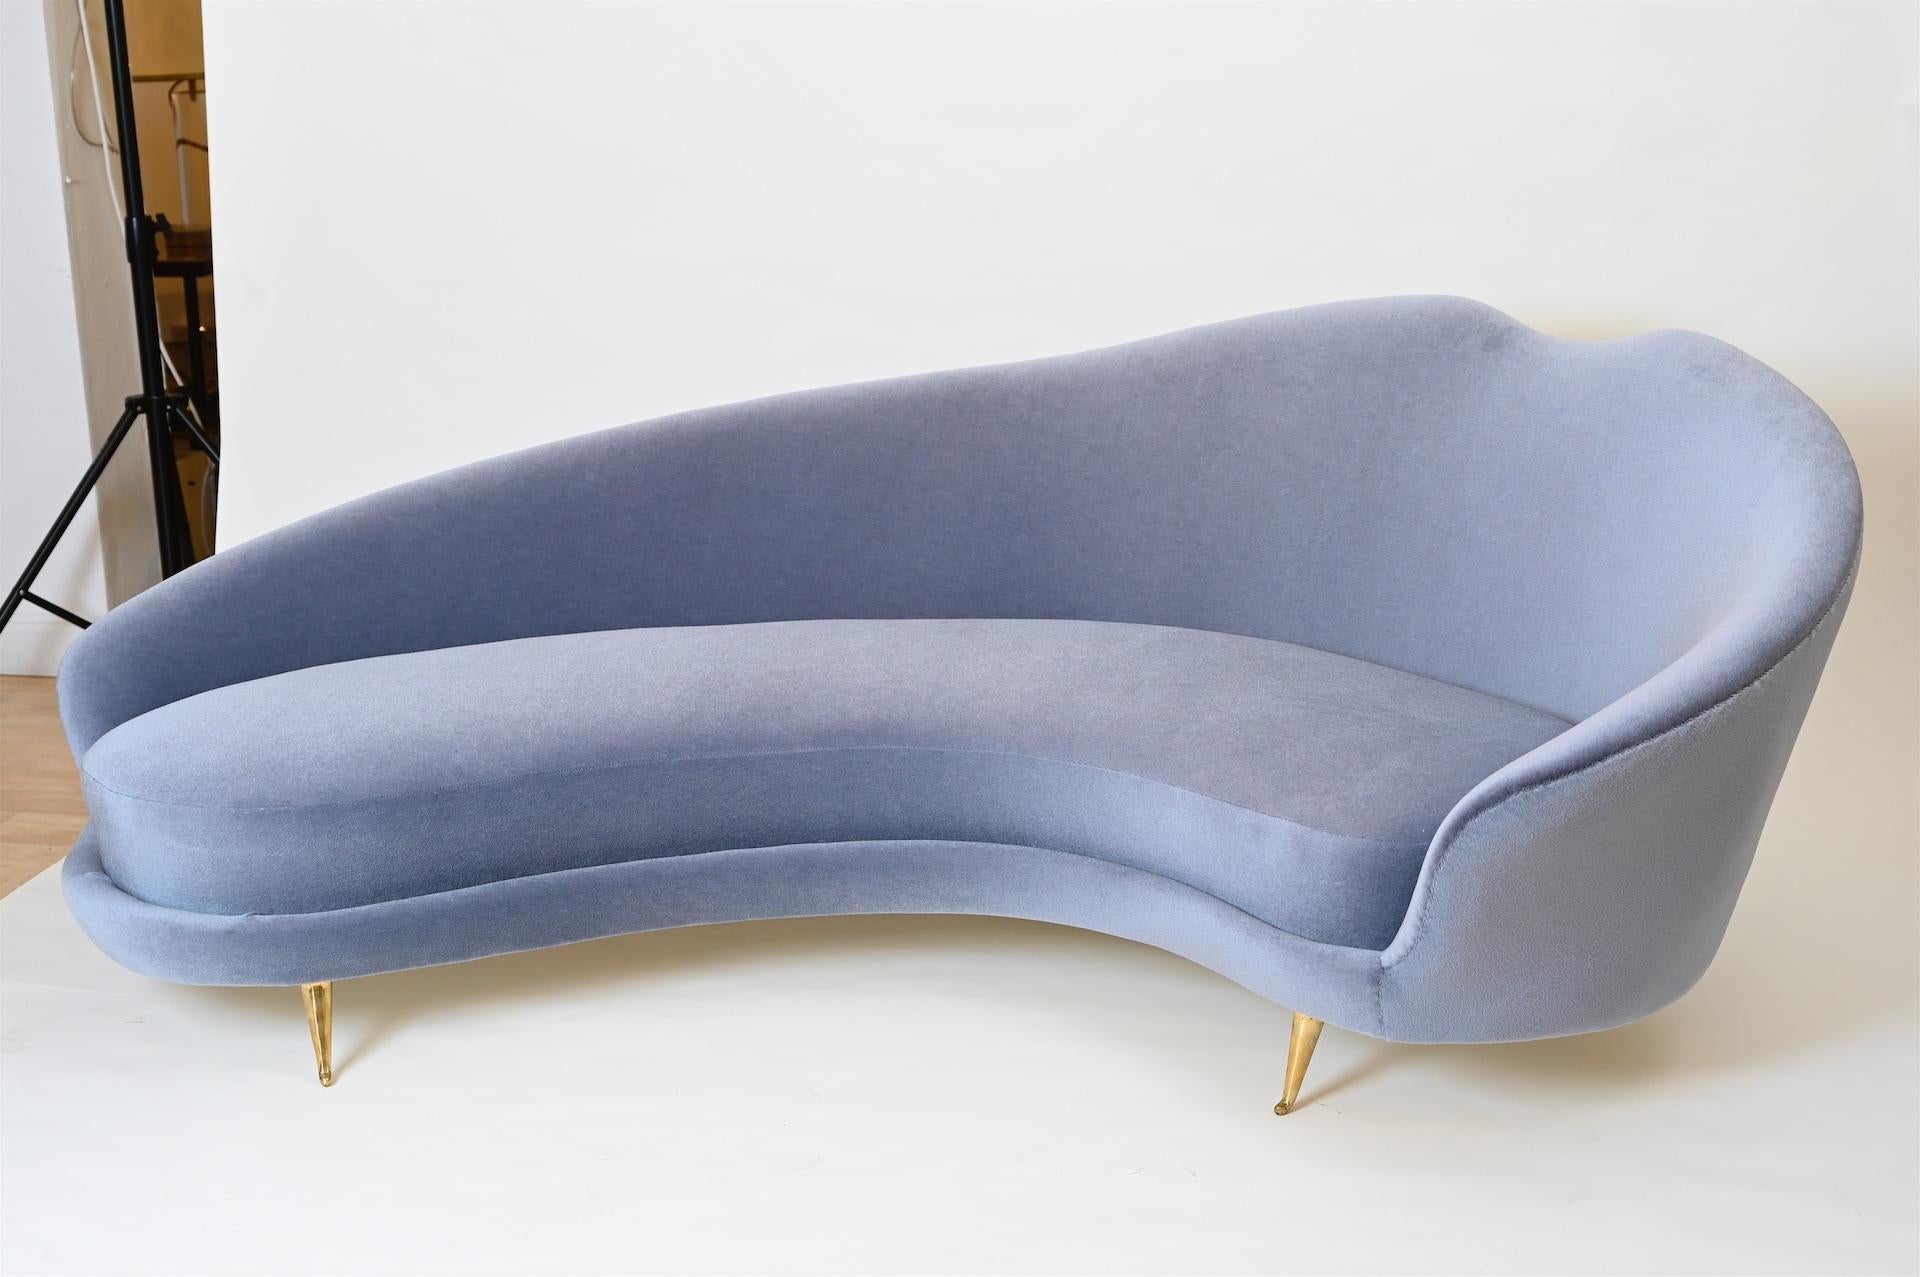 Original 1950s sofa reupholstered in a mohair velvet also attributed to Ico Parisi

Beautifully reupholstered in a mohair velvet.